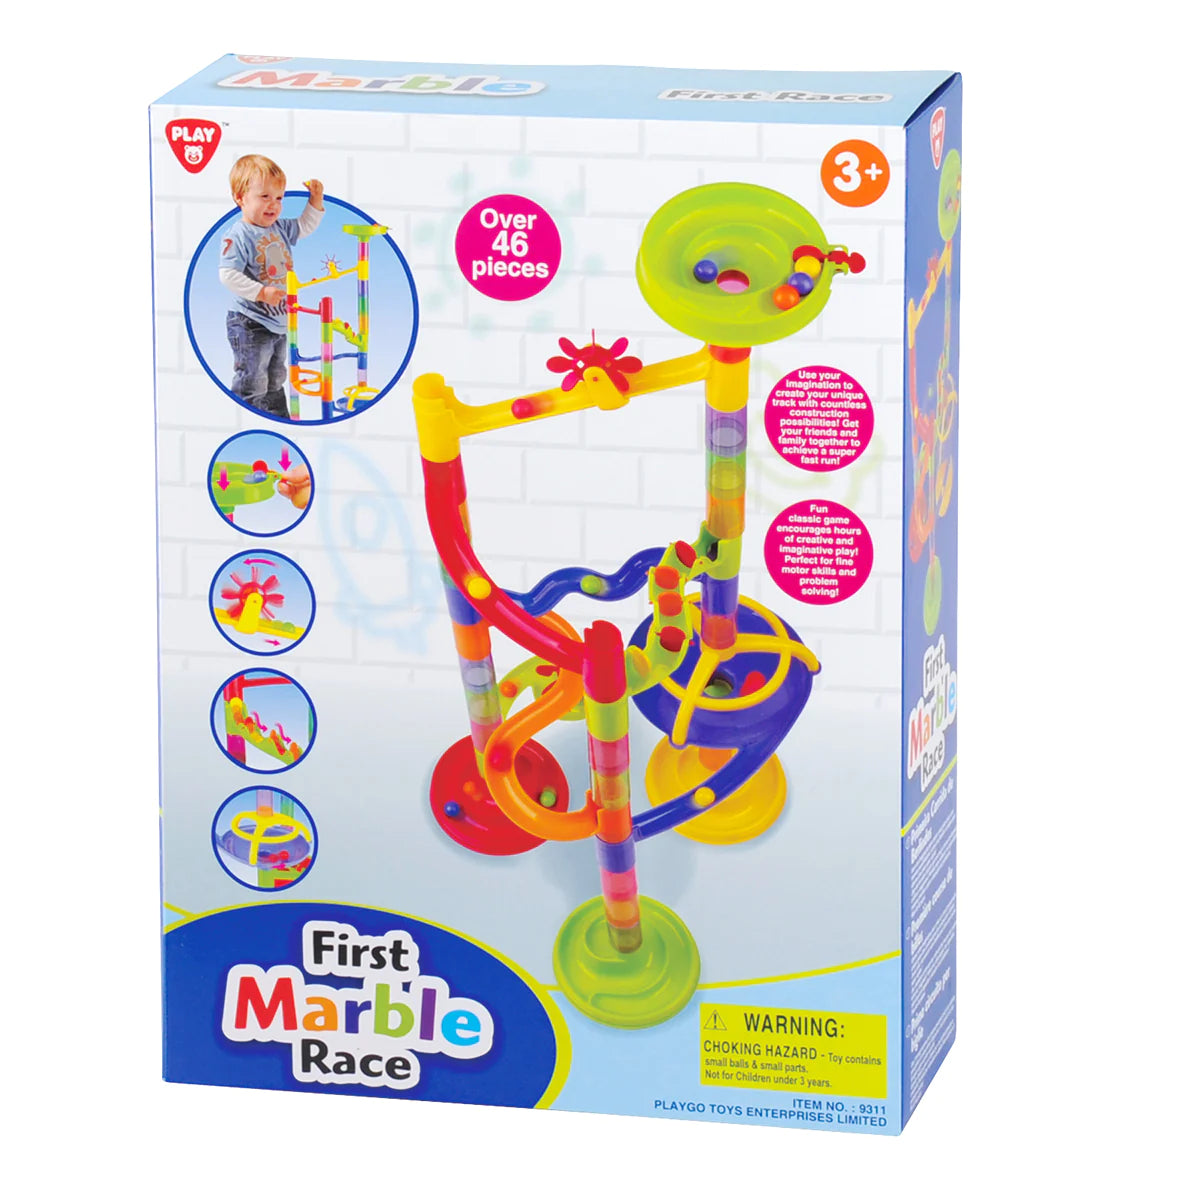 PLAYGO TOYS ENT. LTD. First Marble Race